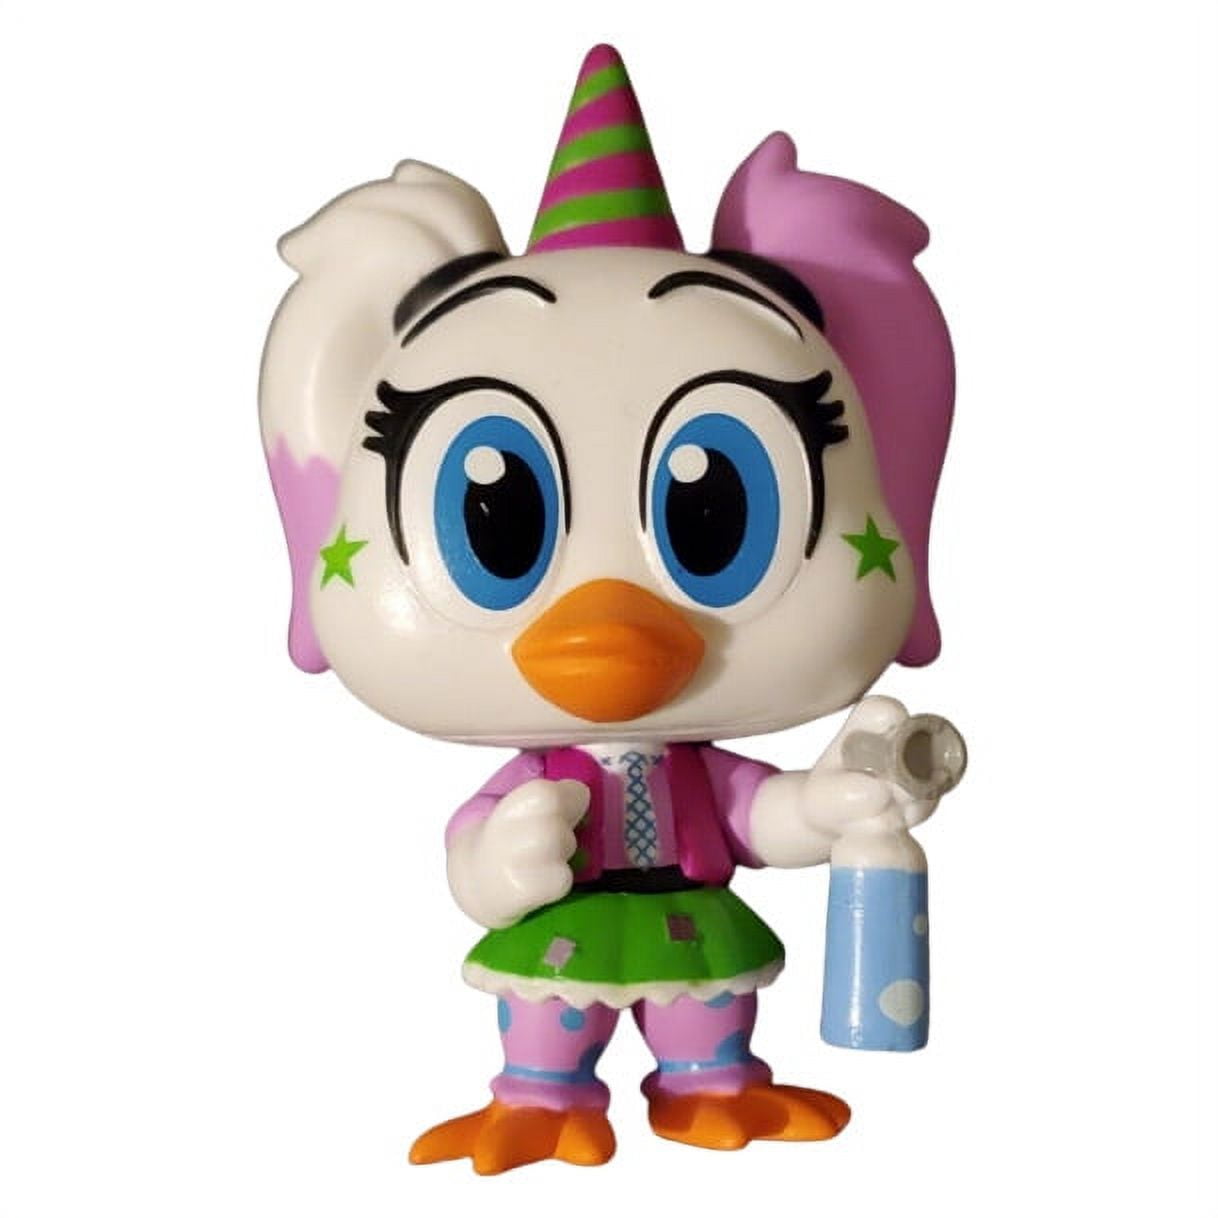 Review of Five Nights At Freddy's Birthday Decorations From Walmart Website  #fnaf #circusbaby 